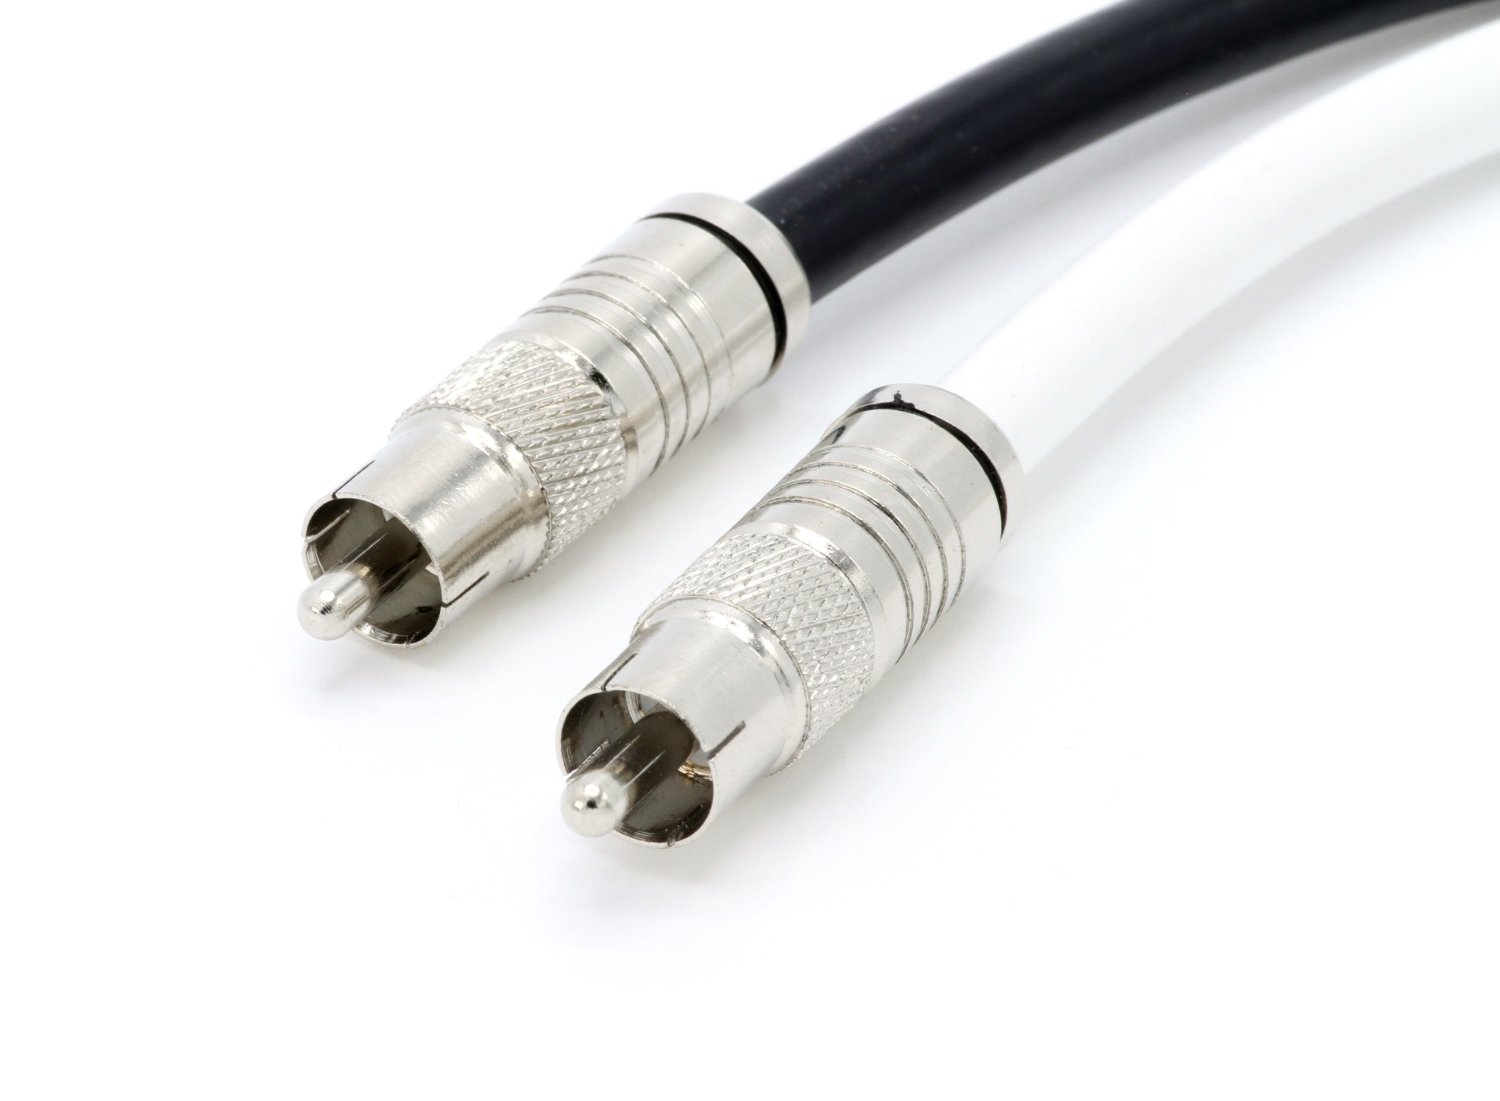 THE CIMPLE CO - Digital Audio Coaxial Cable - Subwoofer Cable - (S/PDIF) RCA Cable, 150 Feet - image 5 of 6